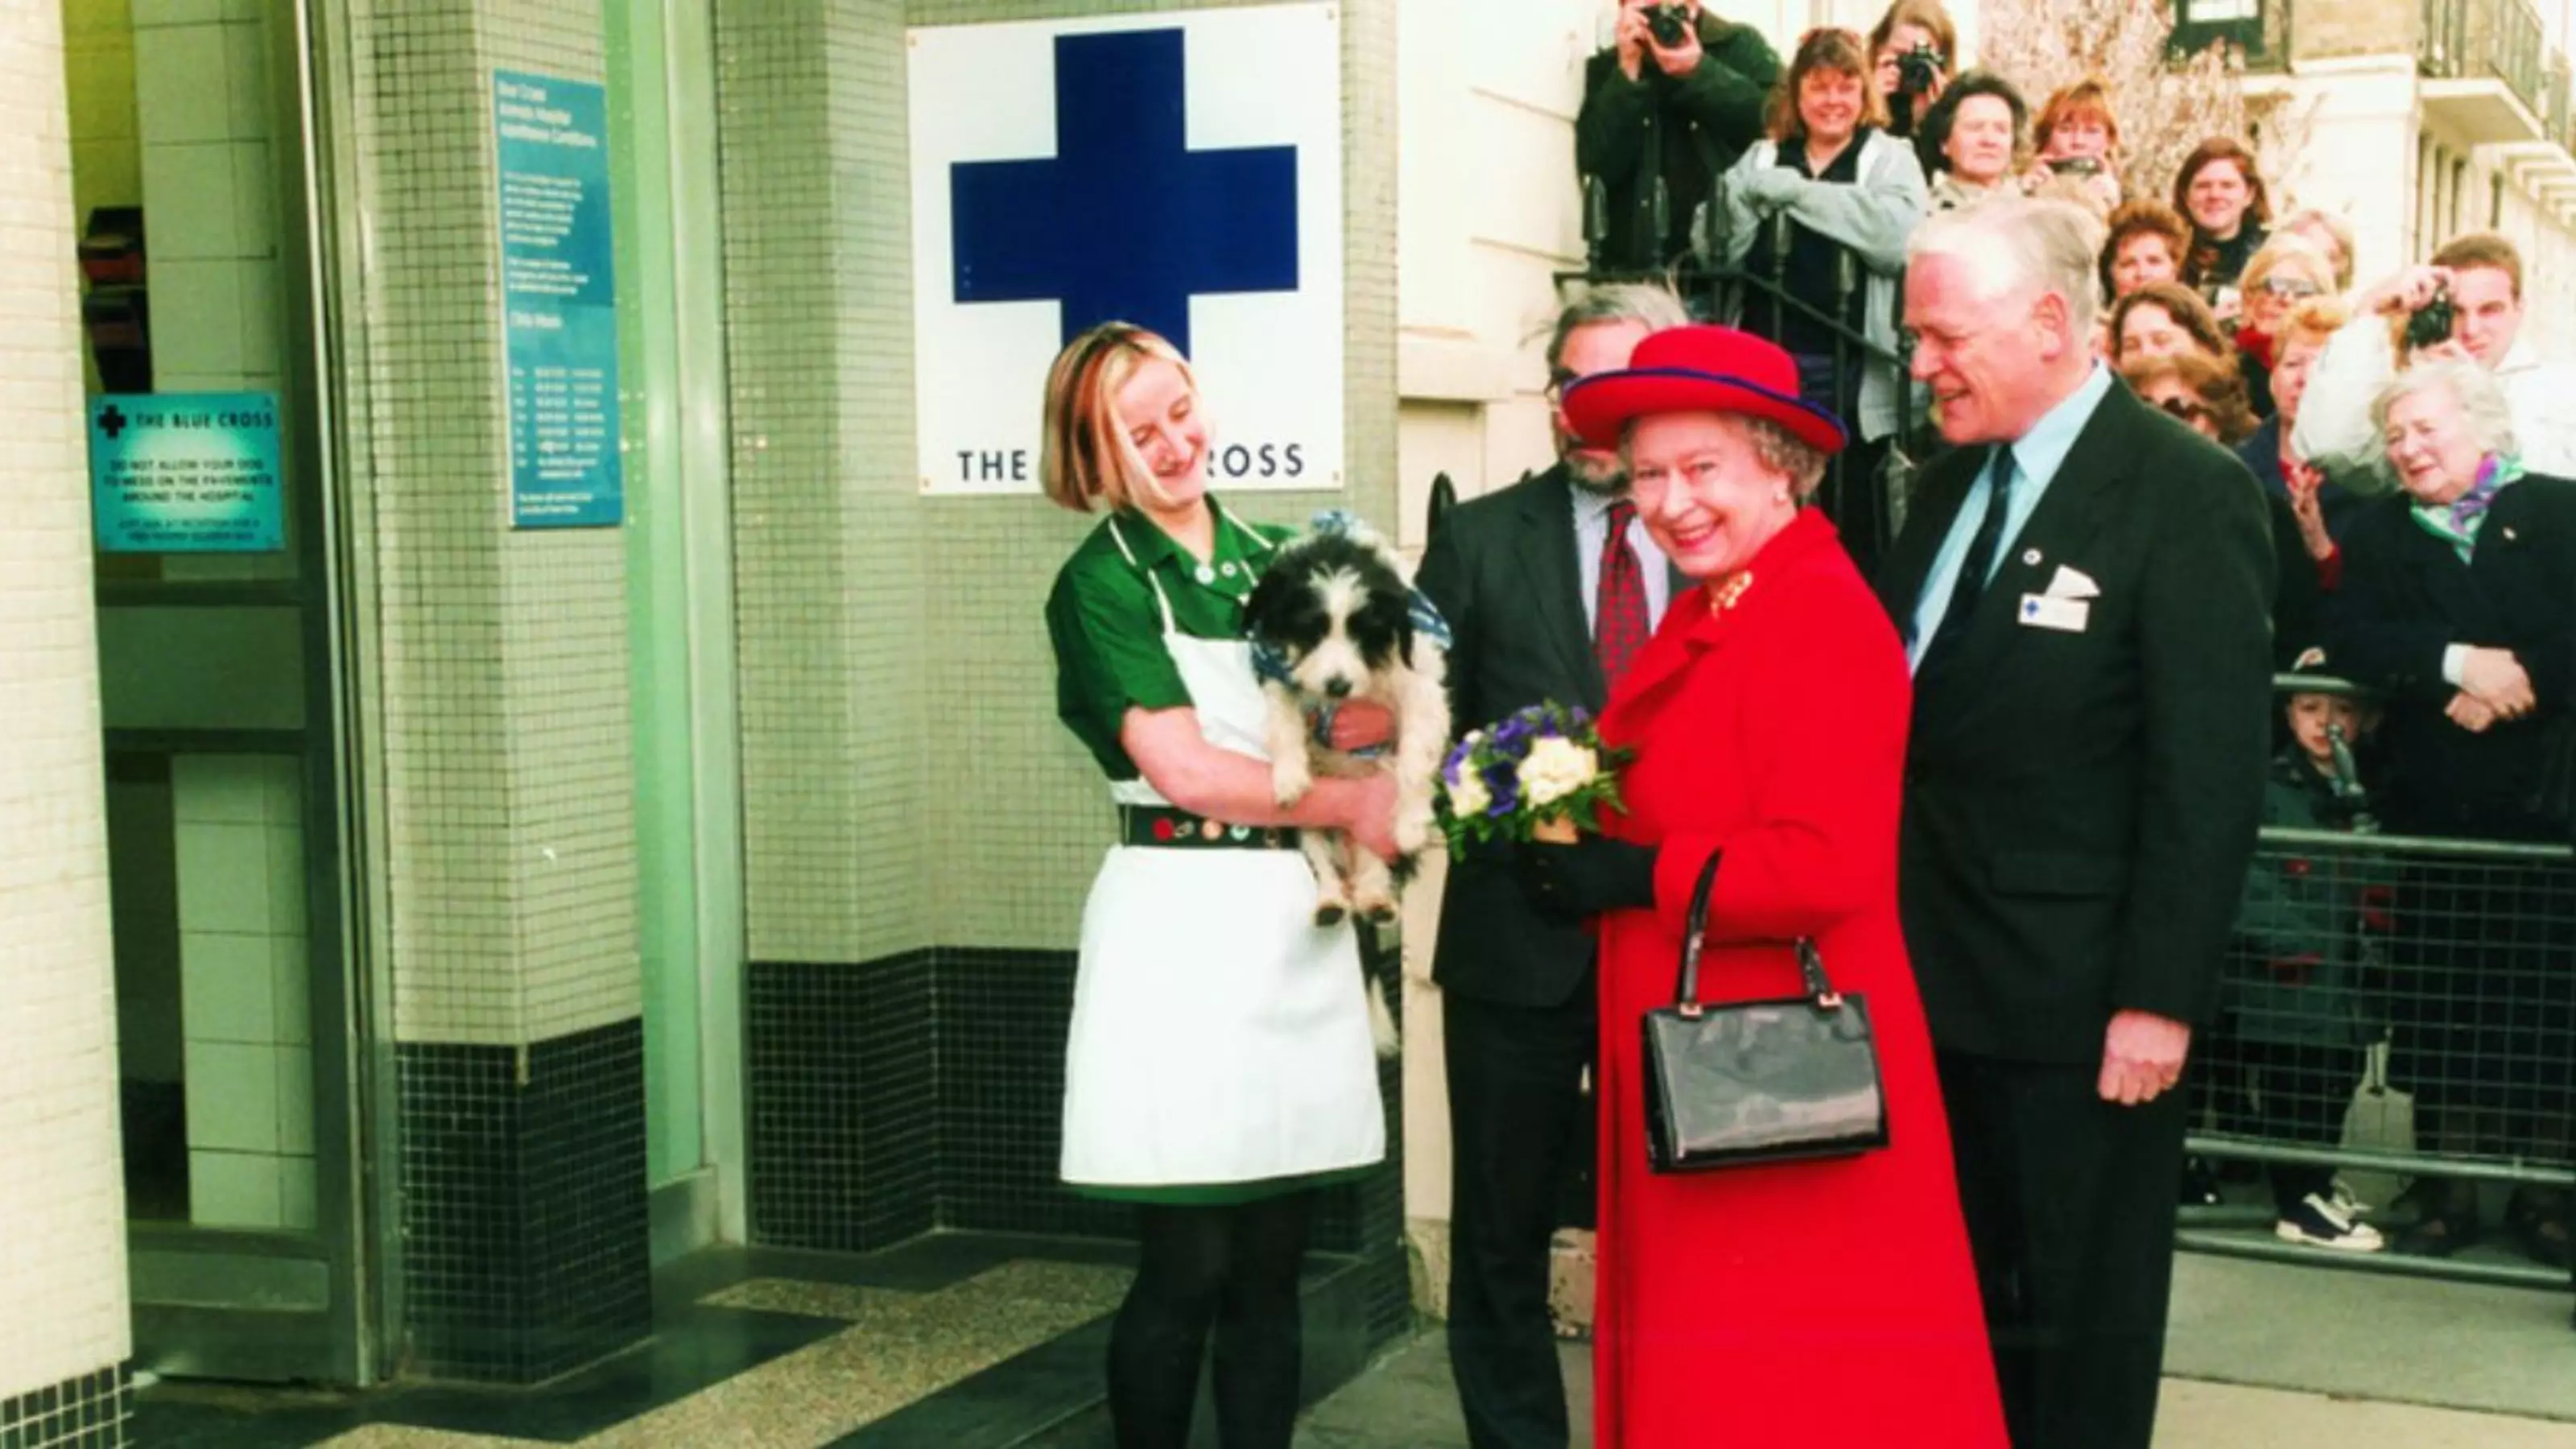 The Queen greets some of our Blue Cross team outside the doors of our London Victoria animal hospital